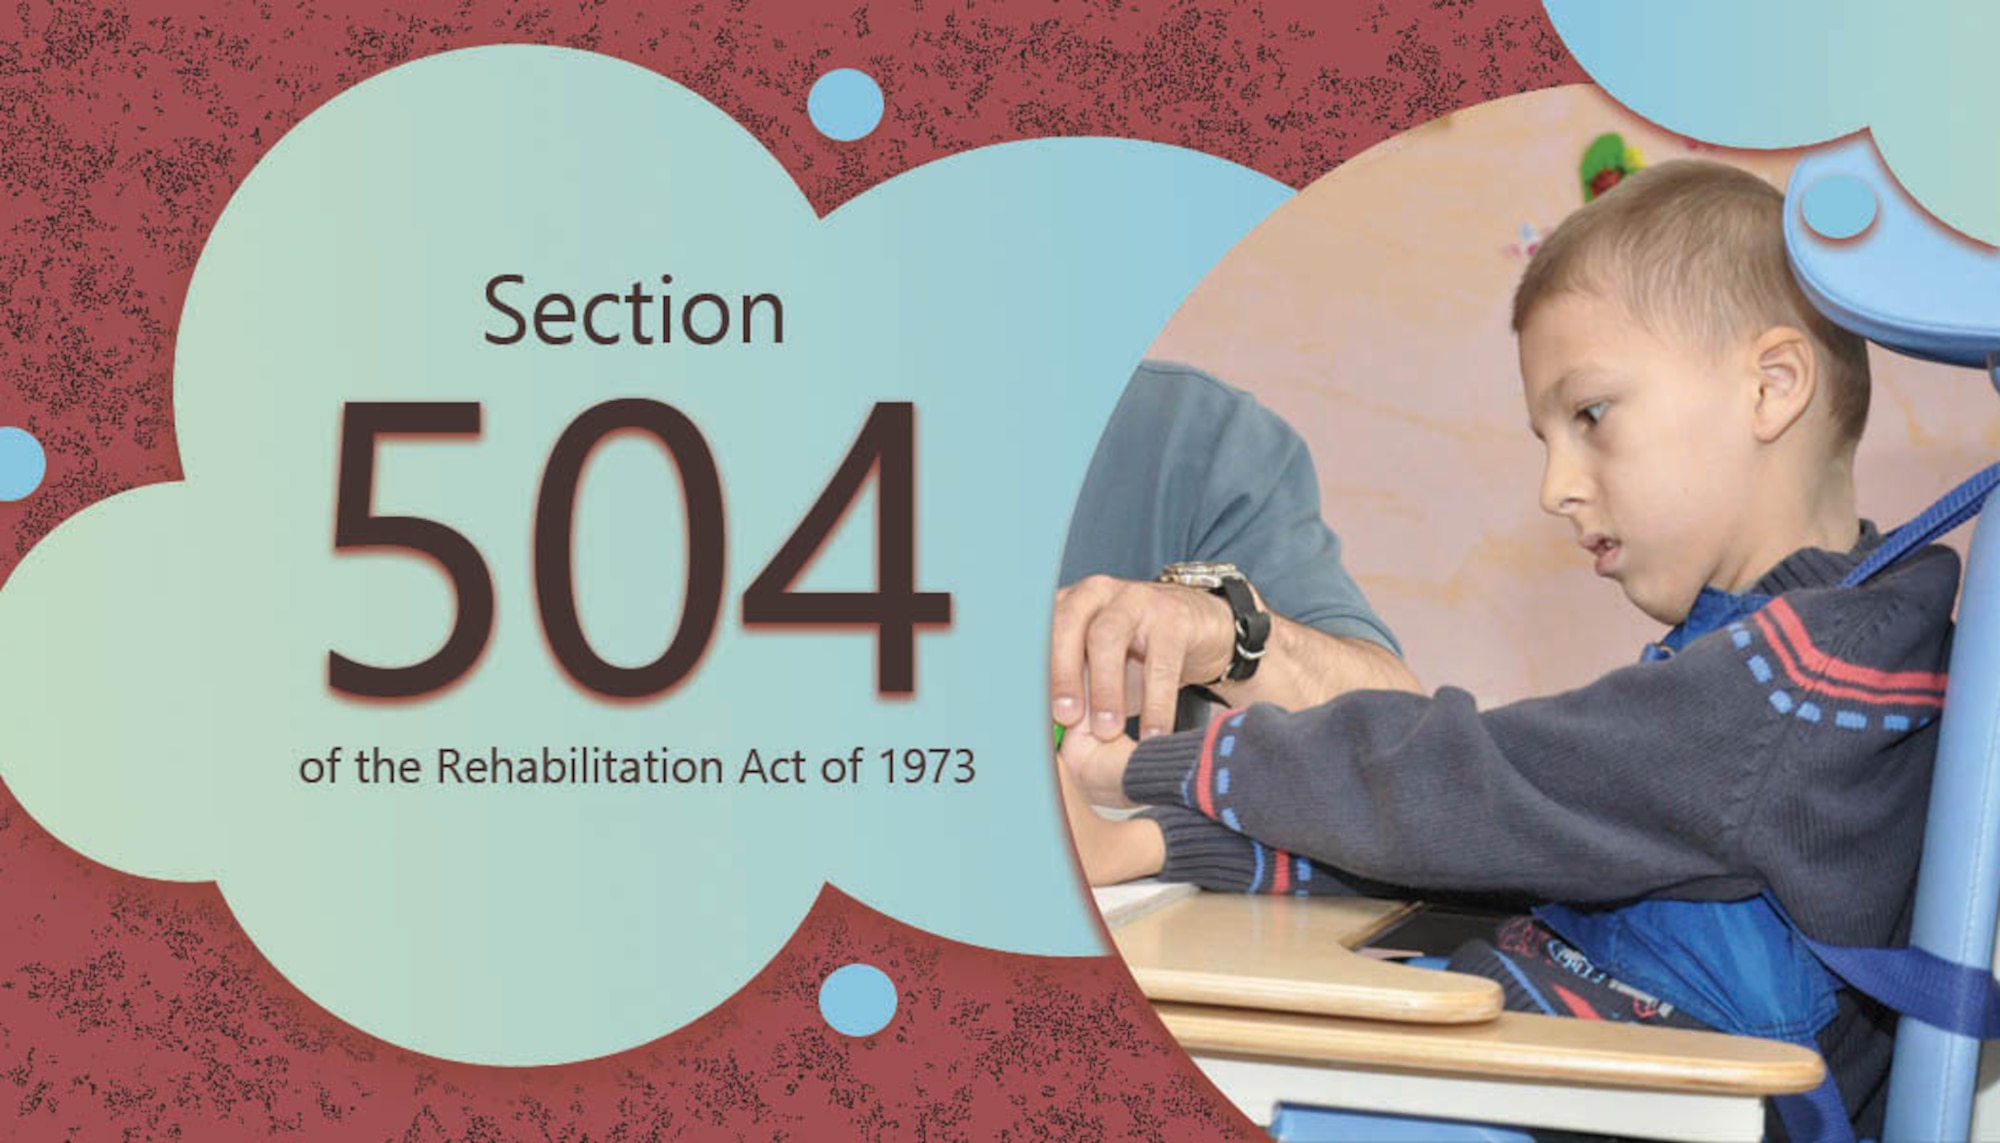 Section 504 of the Rehabilitation Act of 1973 prohibits discrimination against people with disabilities in educational programs that receive federal financial assistance.